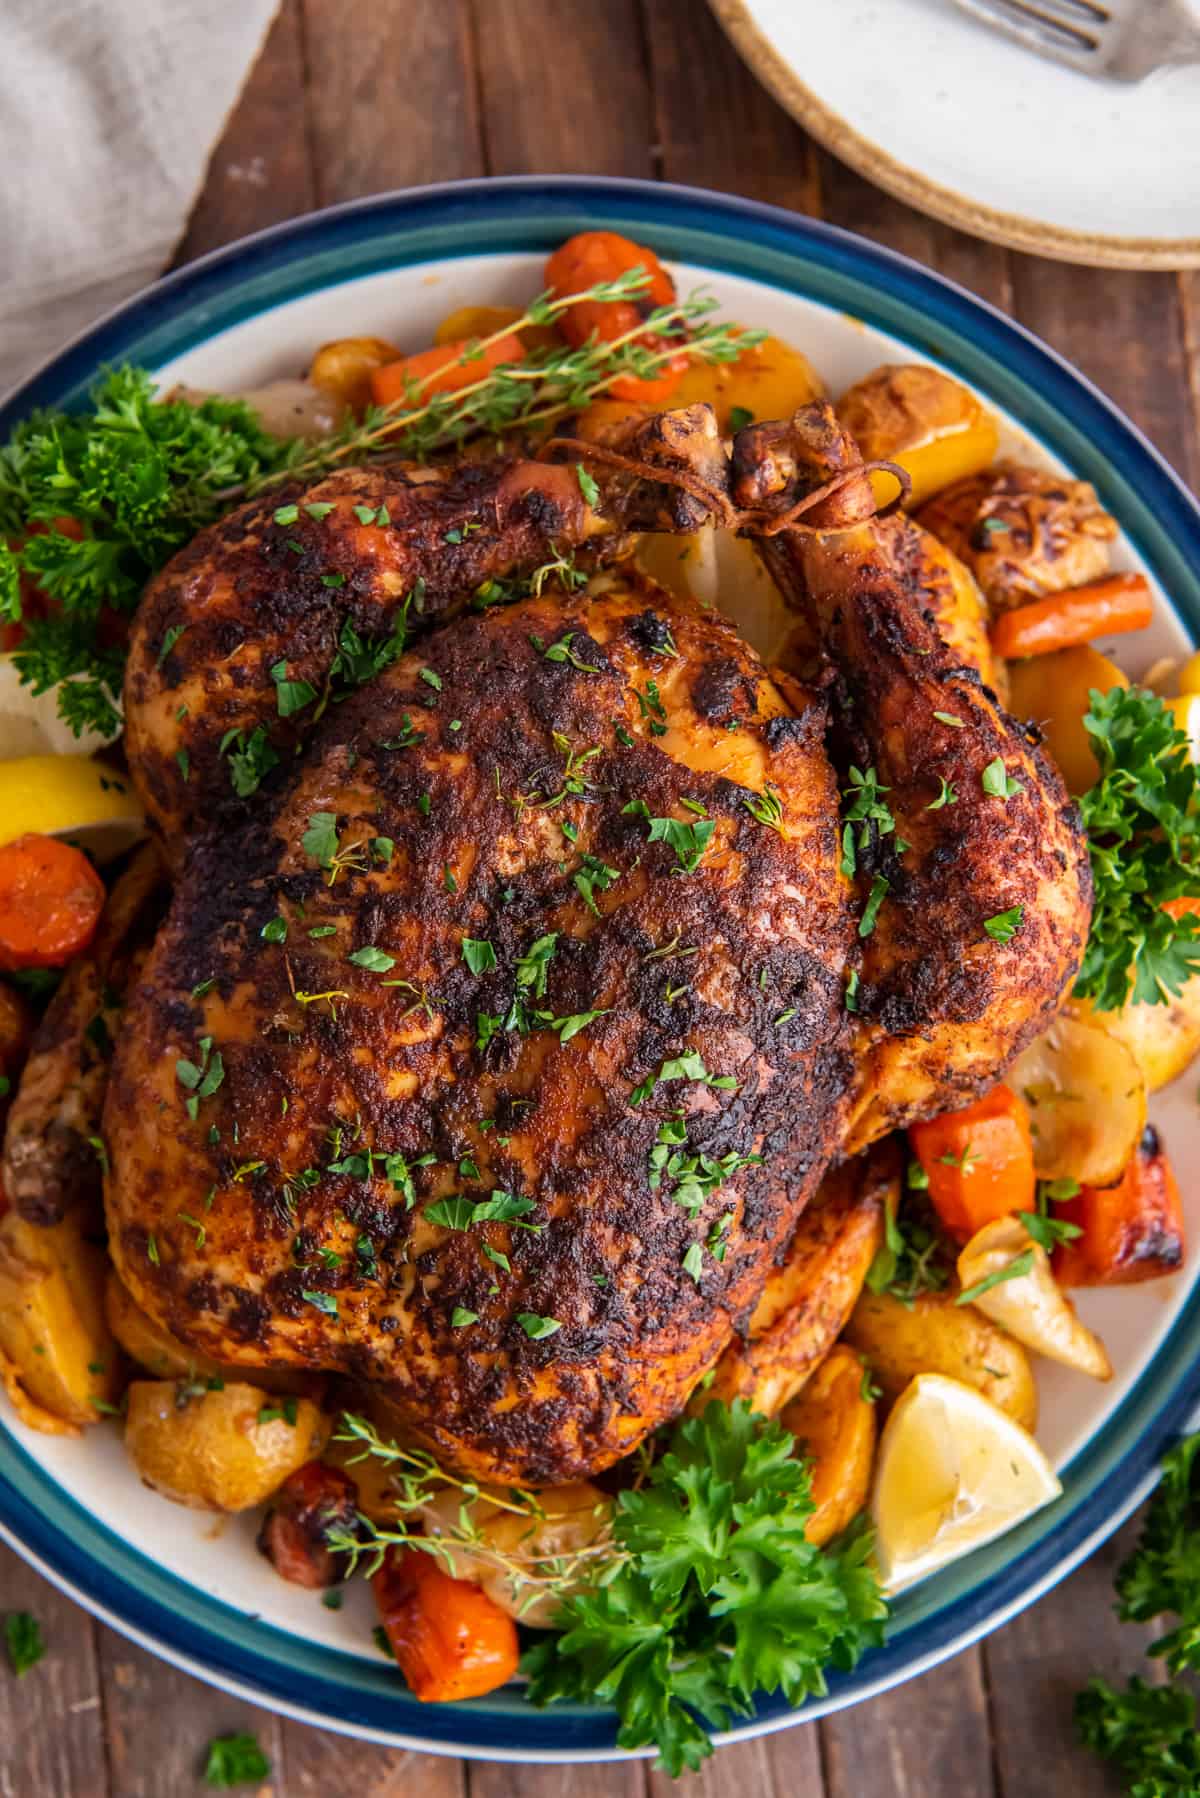 An over the top shot of a roasted whole chicken on a platter with vegetables, fresh herbs, and lemon wedges.